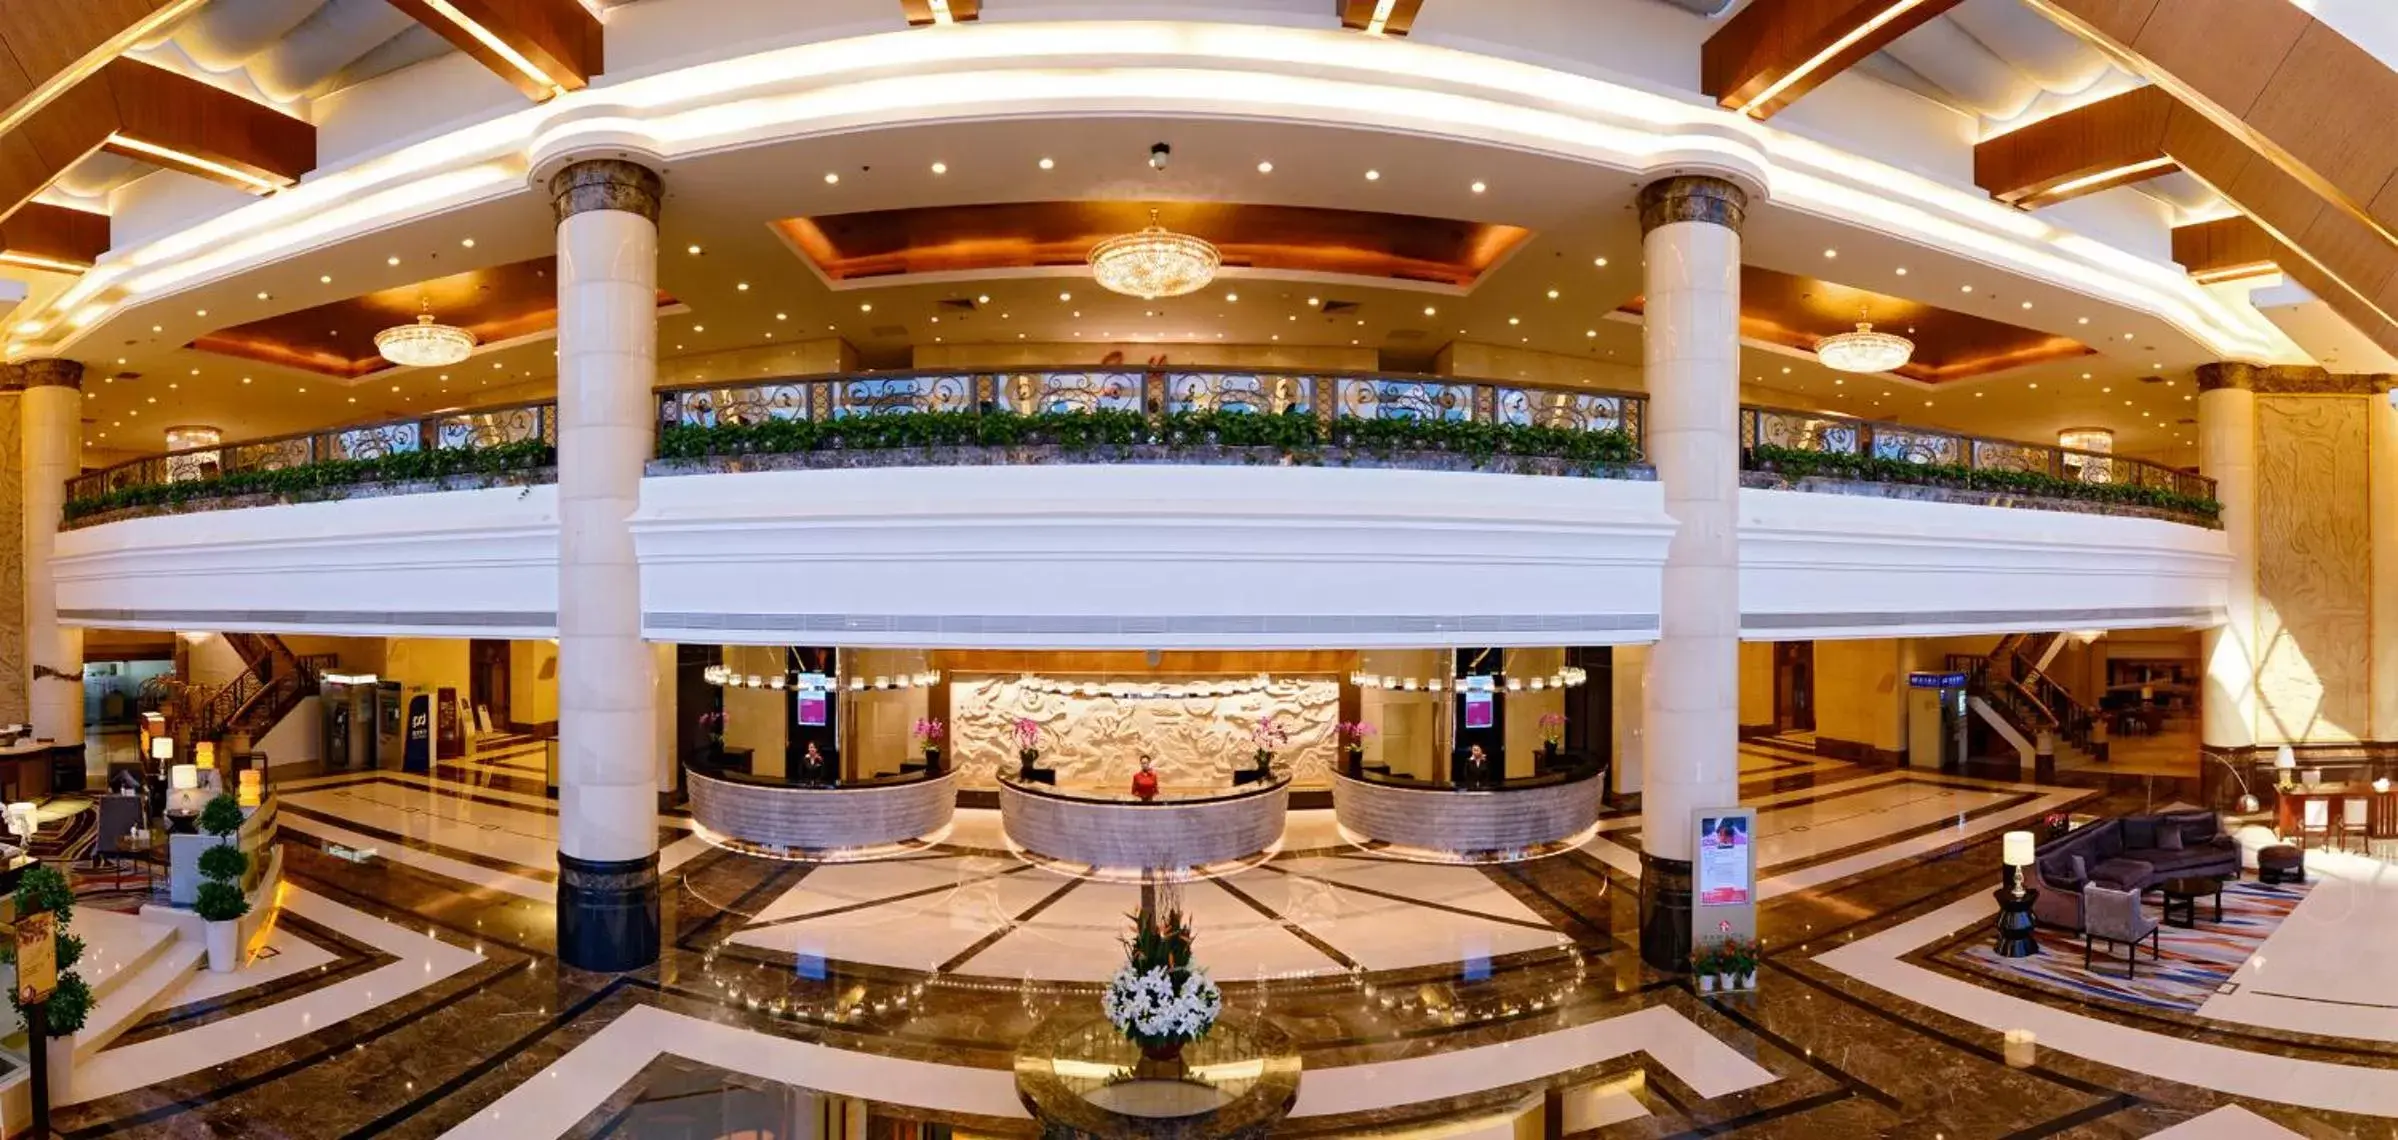 Lobby or reception in Ramada Plaza Shanghai Pudong Airport - A journey starts at the PVG Airport